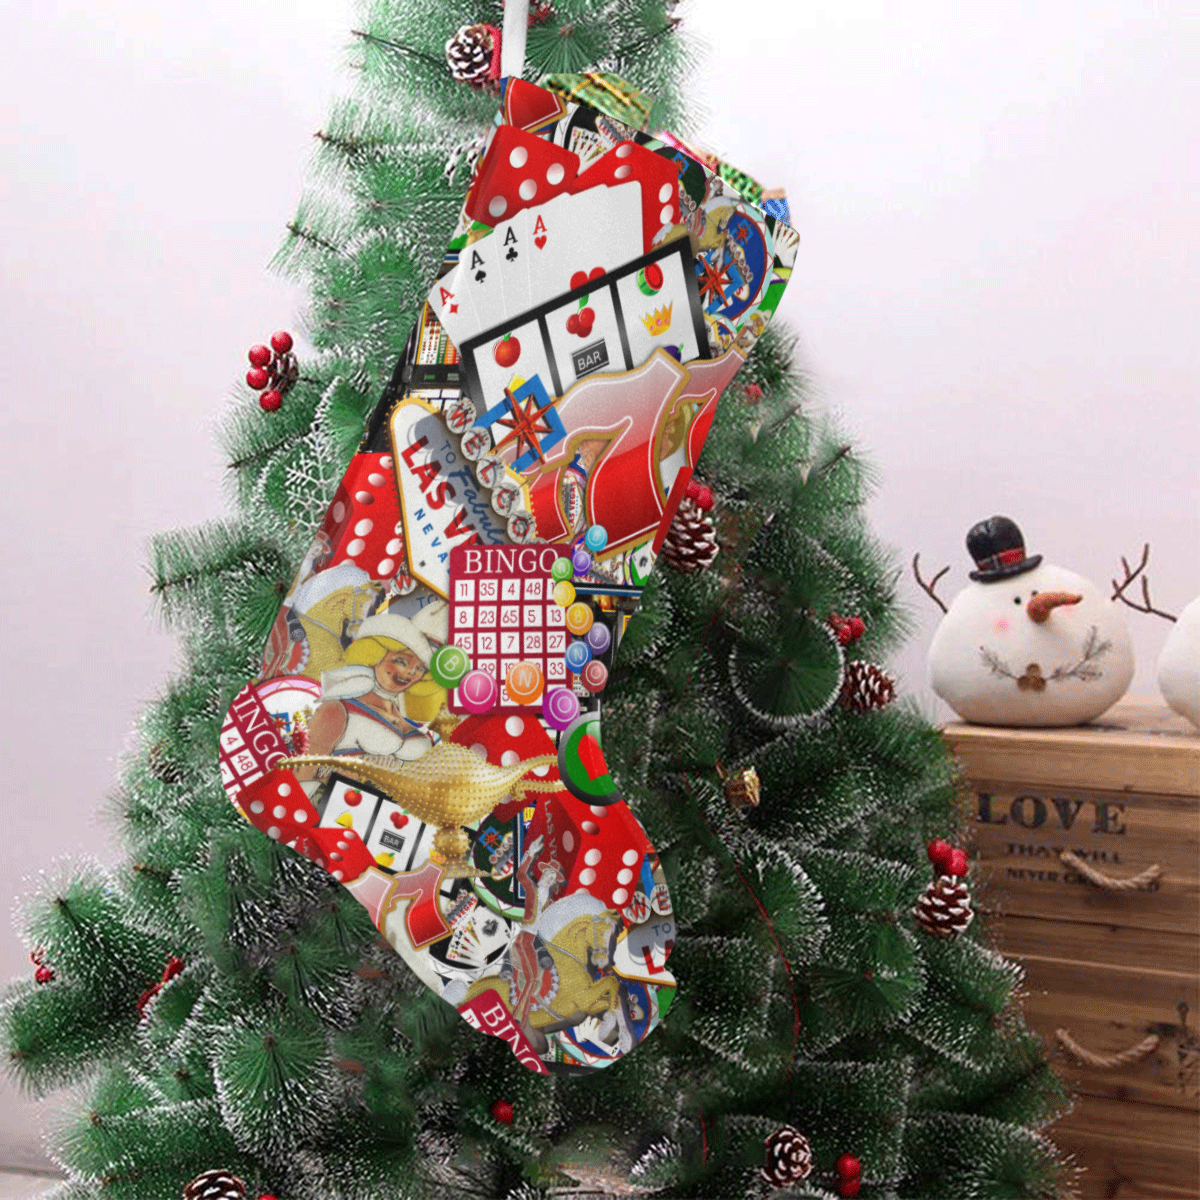 Gamblers Delight - Las Vegas Icons Christmas Stocking (Without Folded Top)